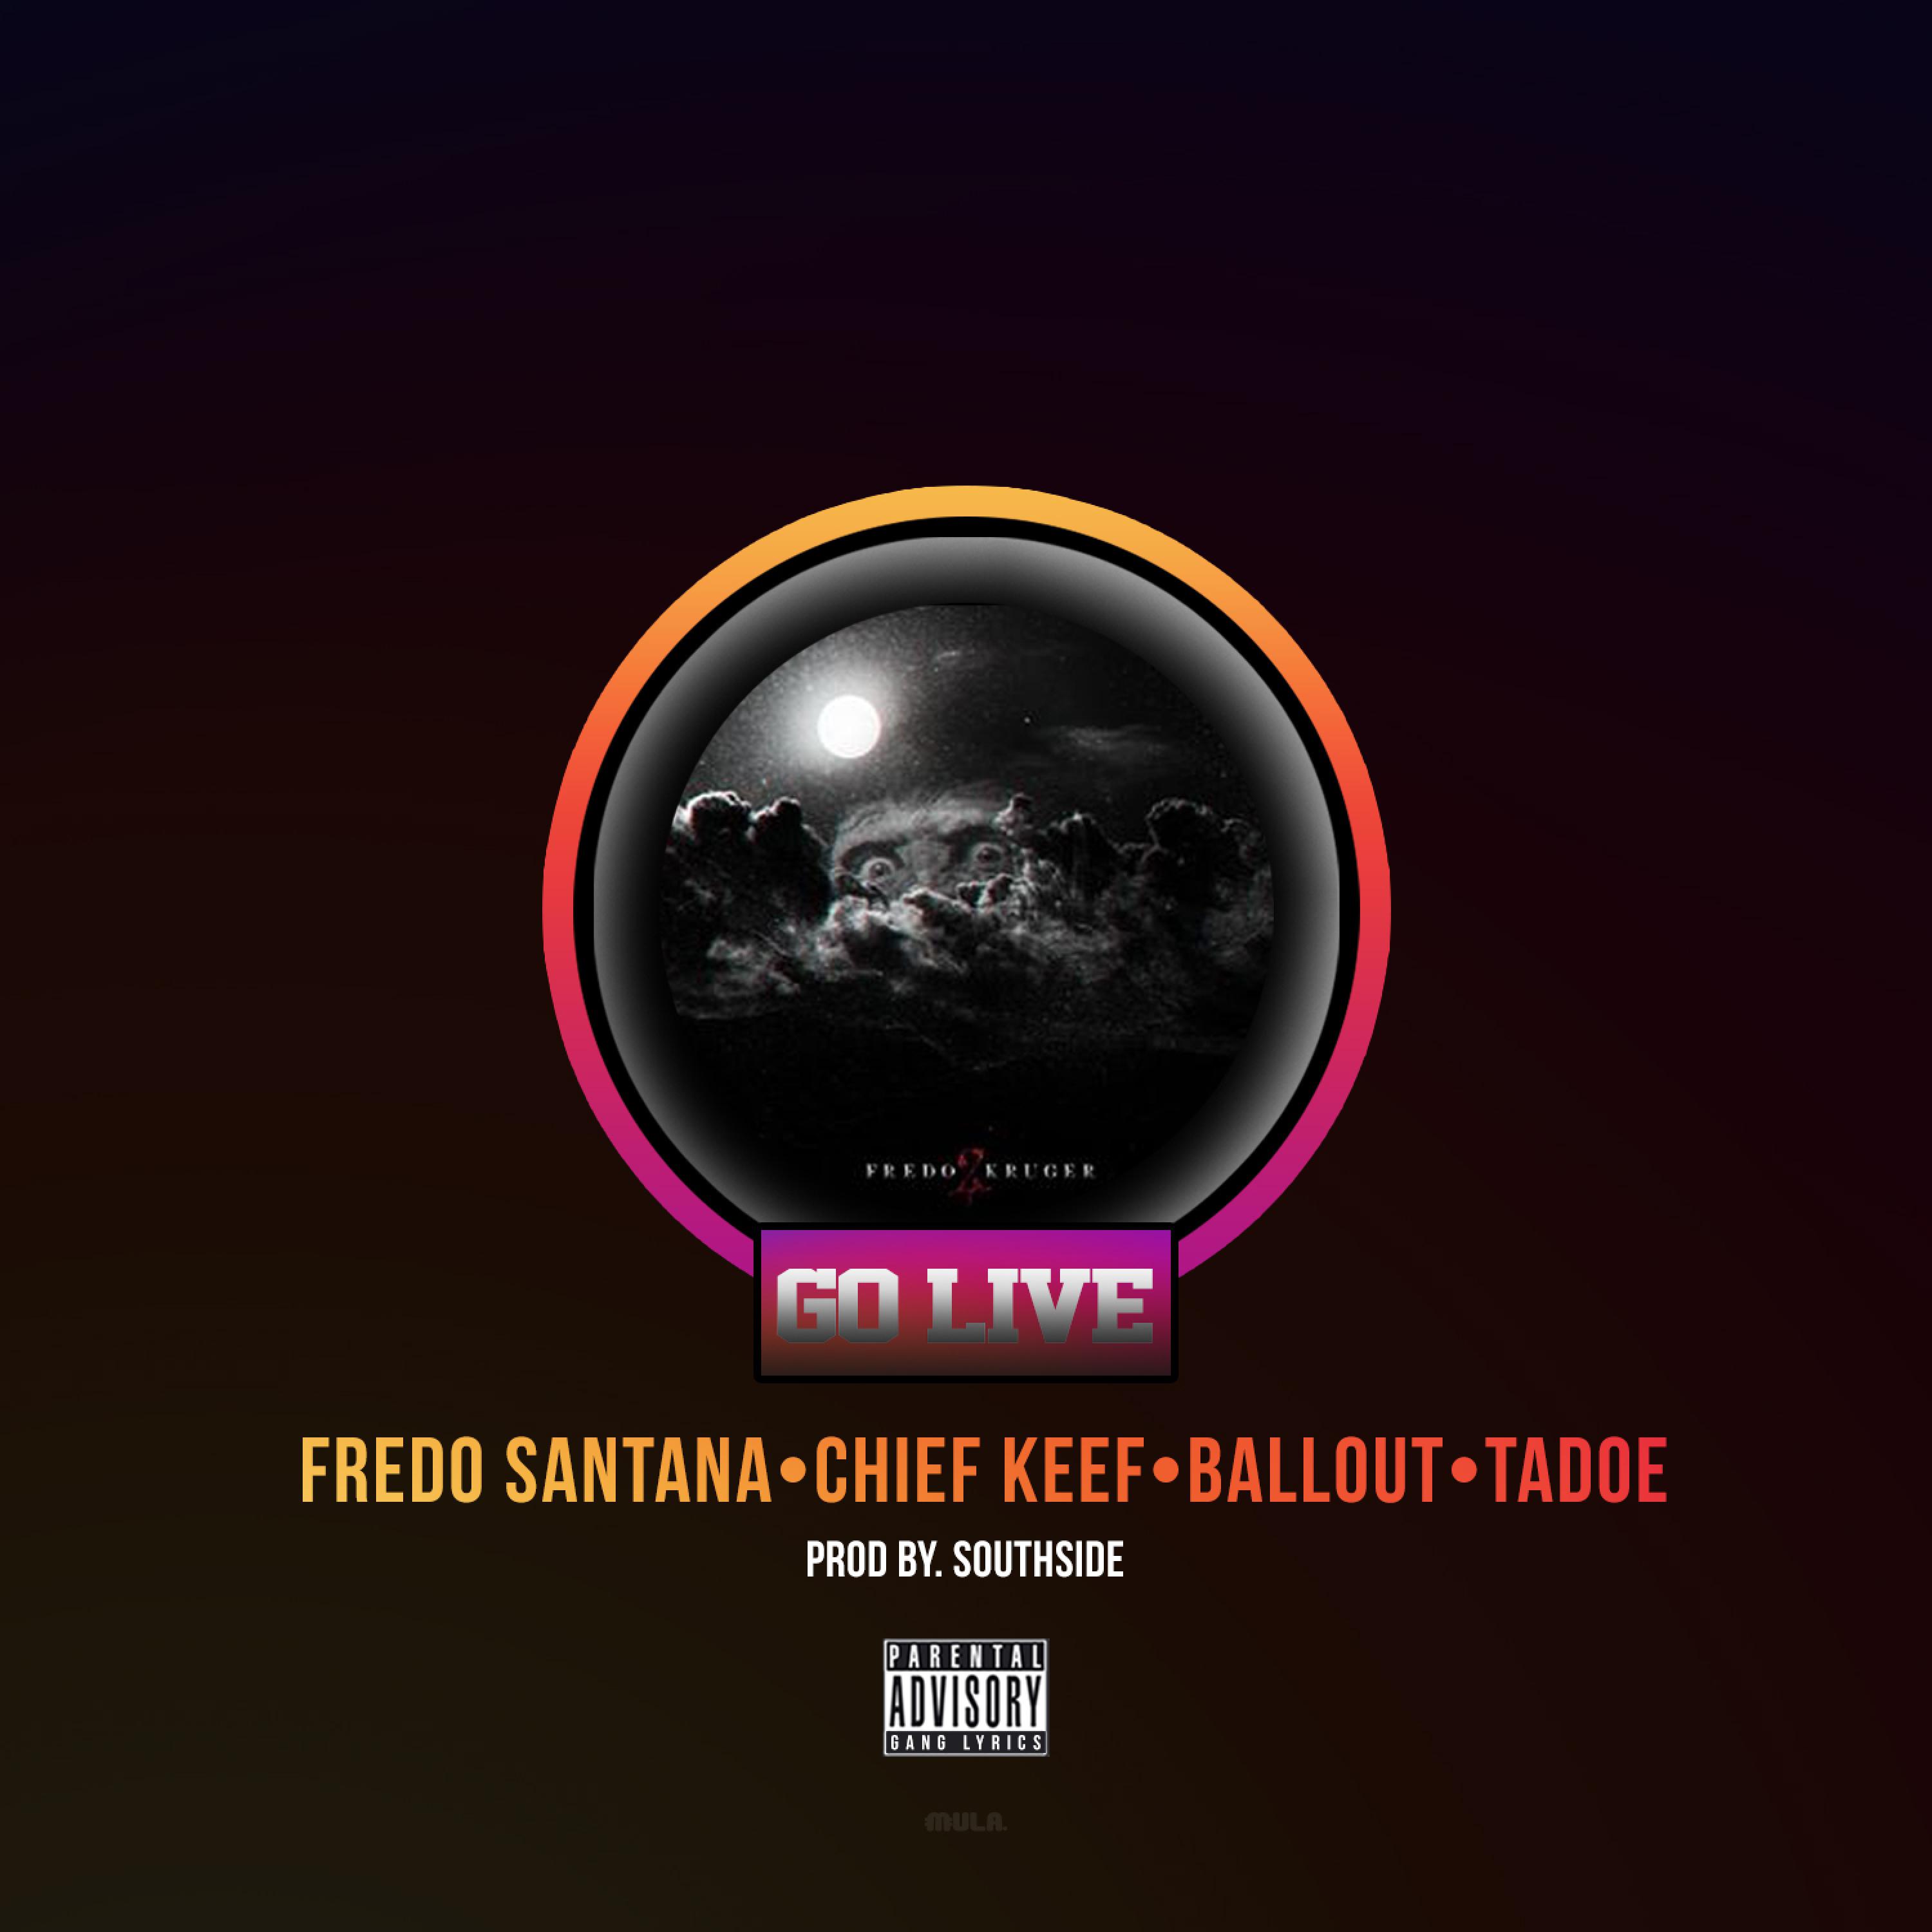 Go Live (feat. Chief Keef, Ballout & Tadoe)